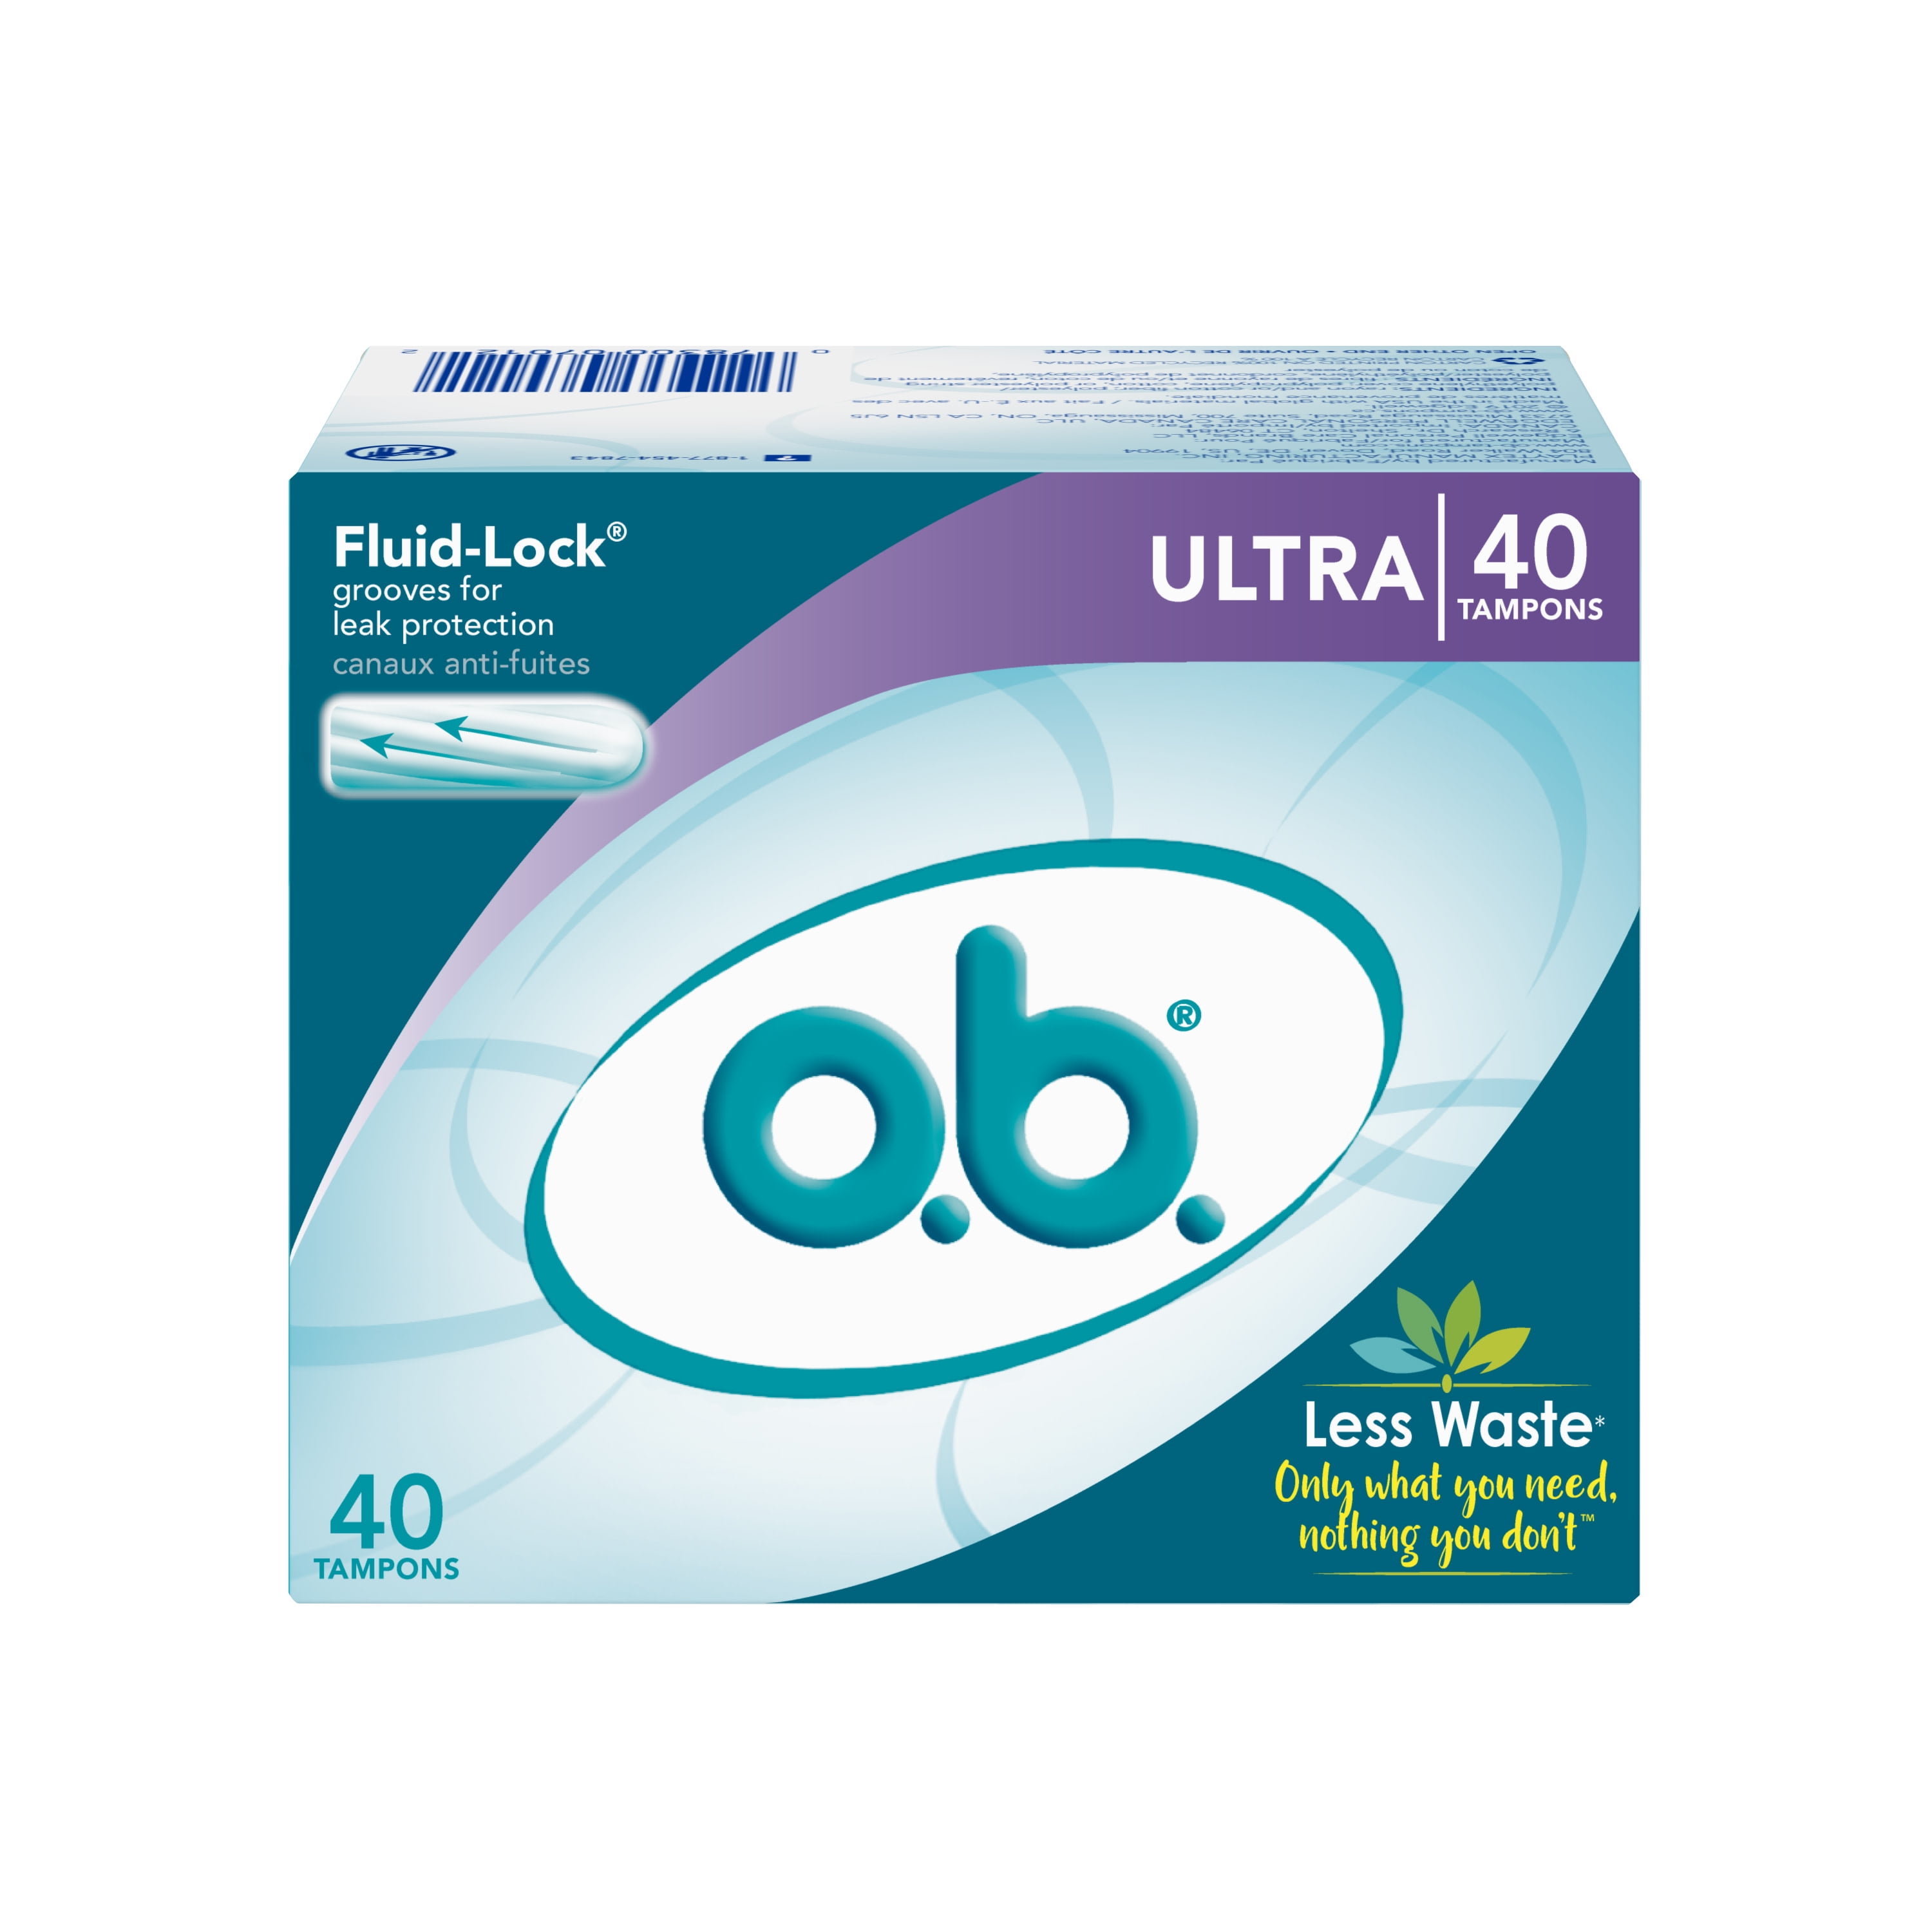 o.b. Original Applicator-Free Tampons, Absorbency, Ct, Fluid-Lock Grooves For Locked In Protection, Less Waste With No Applicator - Walmart.com